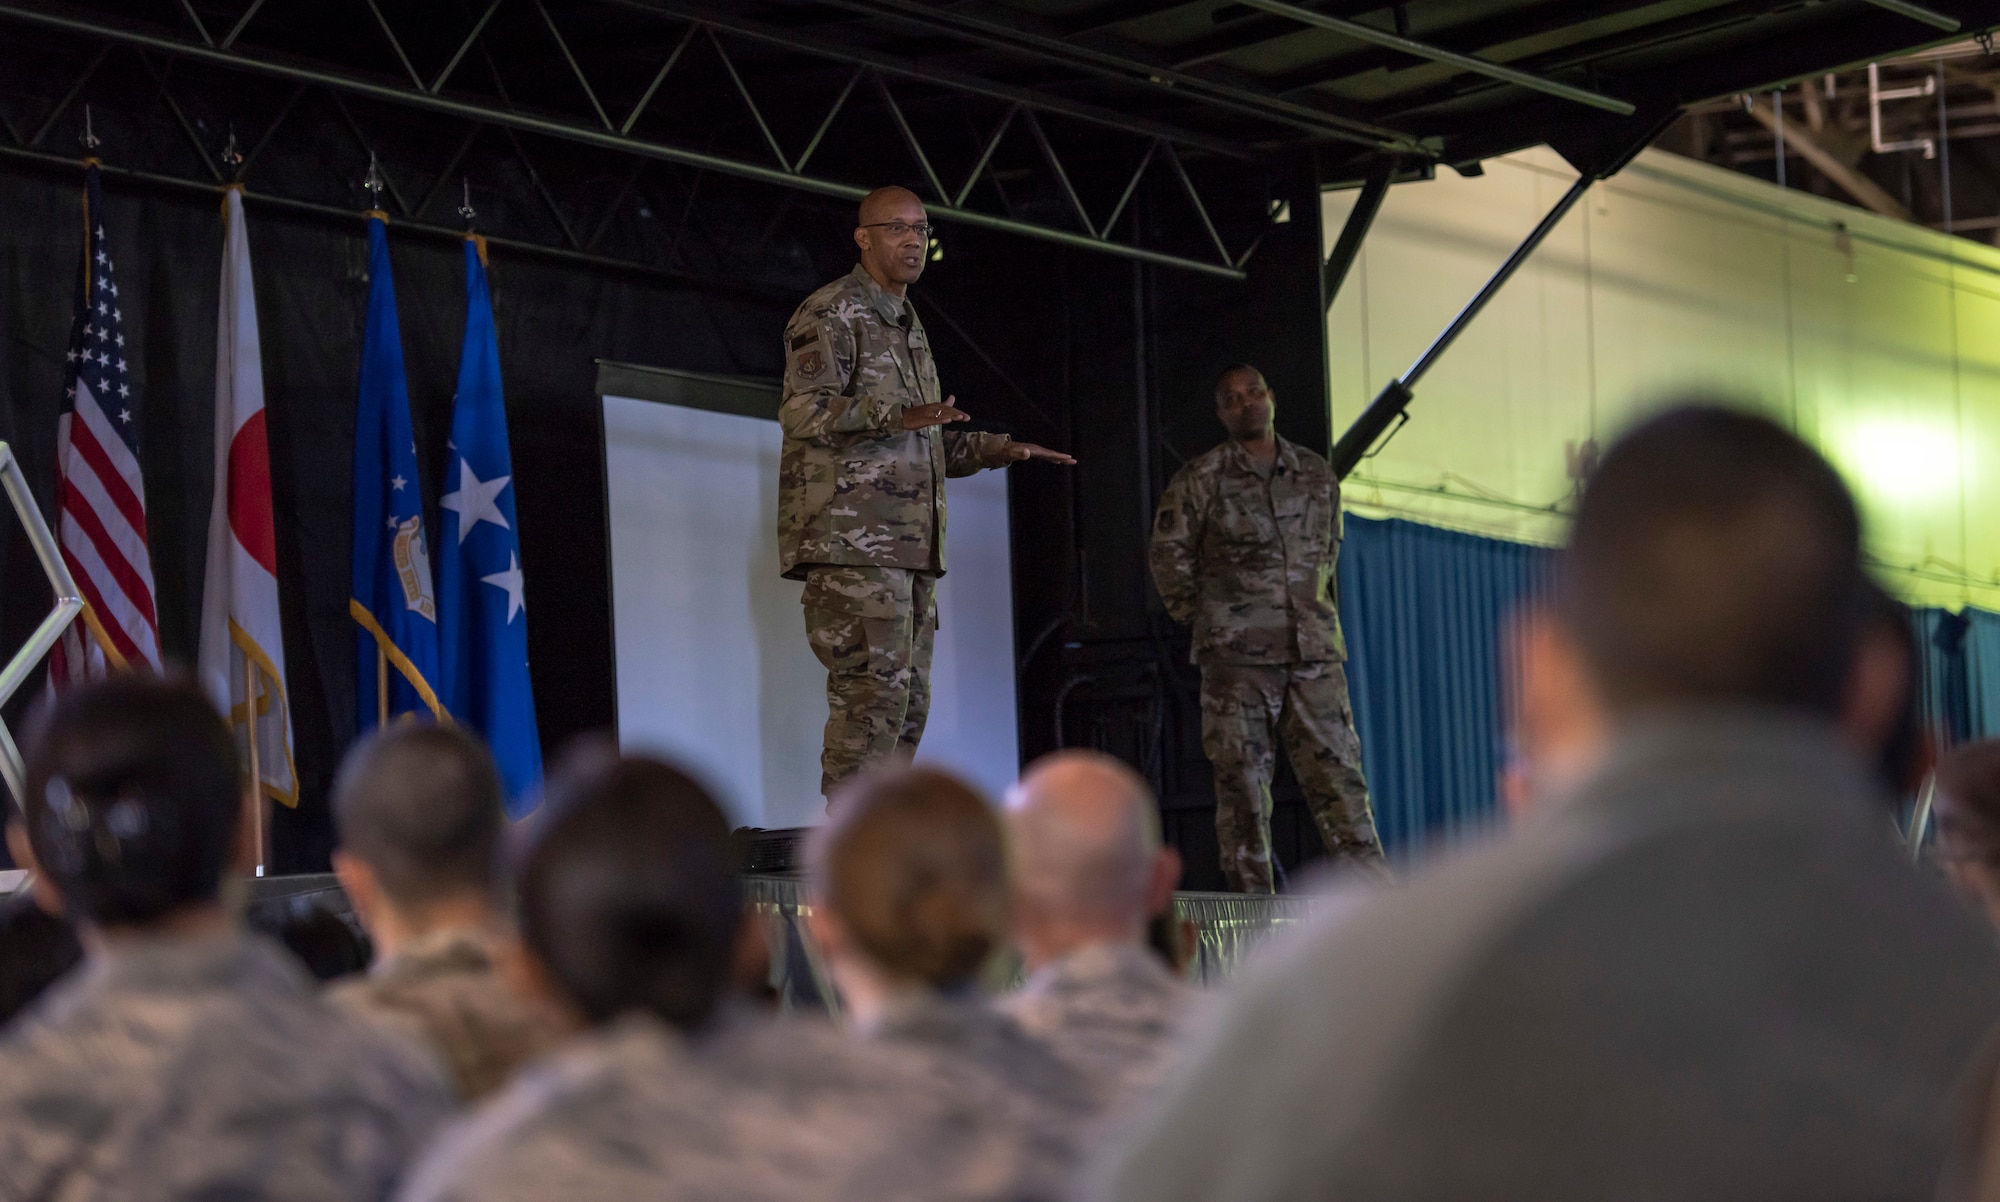 Gen. CQ Brown, Jr., Pacific Air Forces commander, conducts an all-call with Airmen from the 35th Fighter Wing at Misawa Air Base, Japan, Oct. 25, 2018. Brown made clear that the most important assets in the command are its Airmen. He expressed that their development is the enduring strength and future of PACAF. (U.S. Air Force photo by Tech. Sgt. Benjamin W. Stratton)